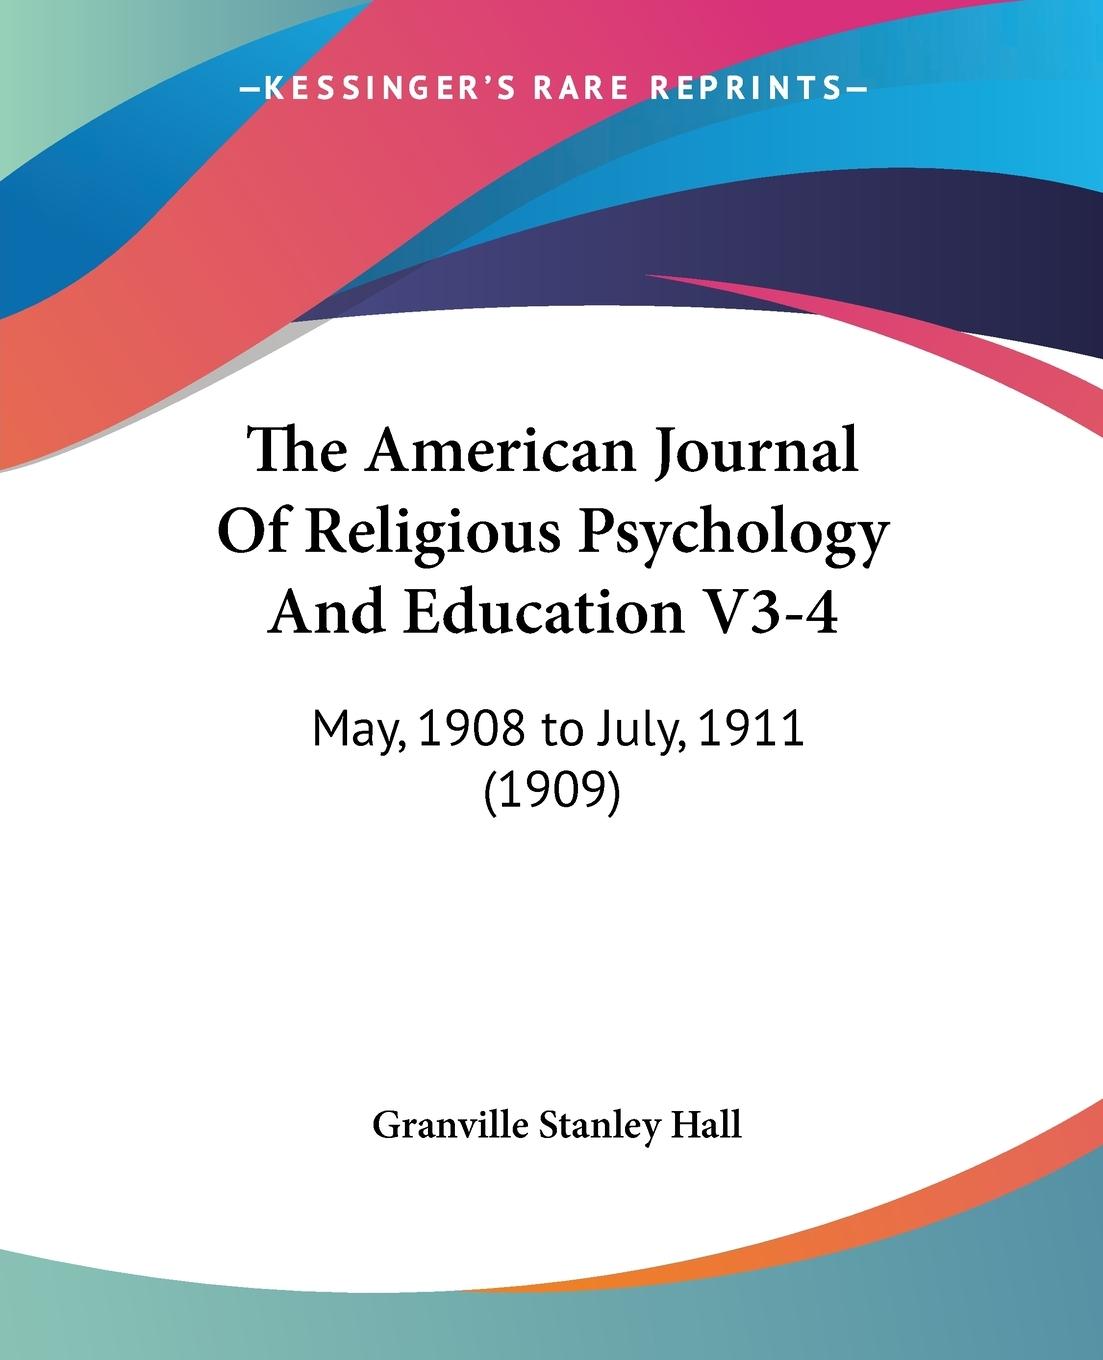 The American Journal Of Religious Psychology And Education V3-4 - Hall, Granville Stanley